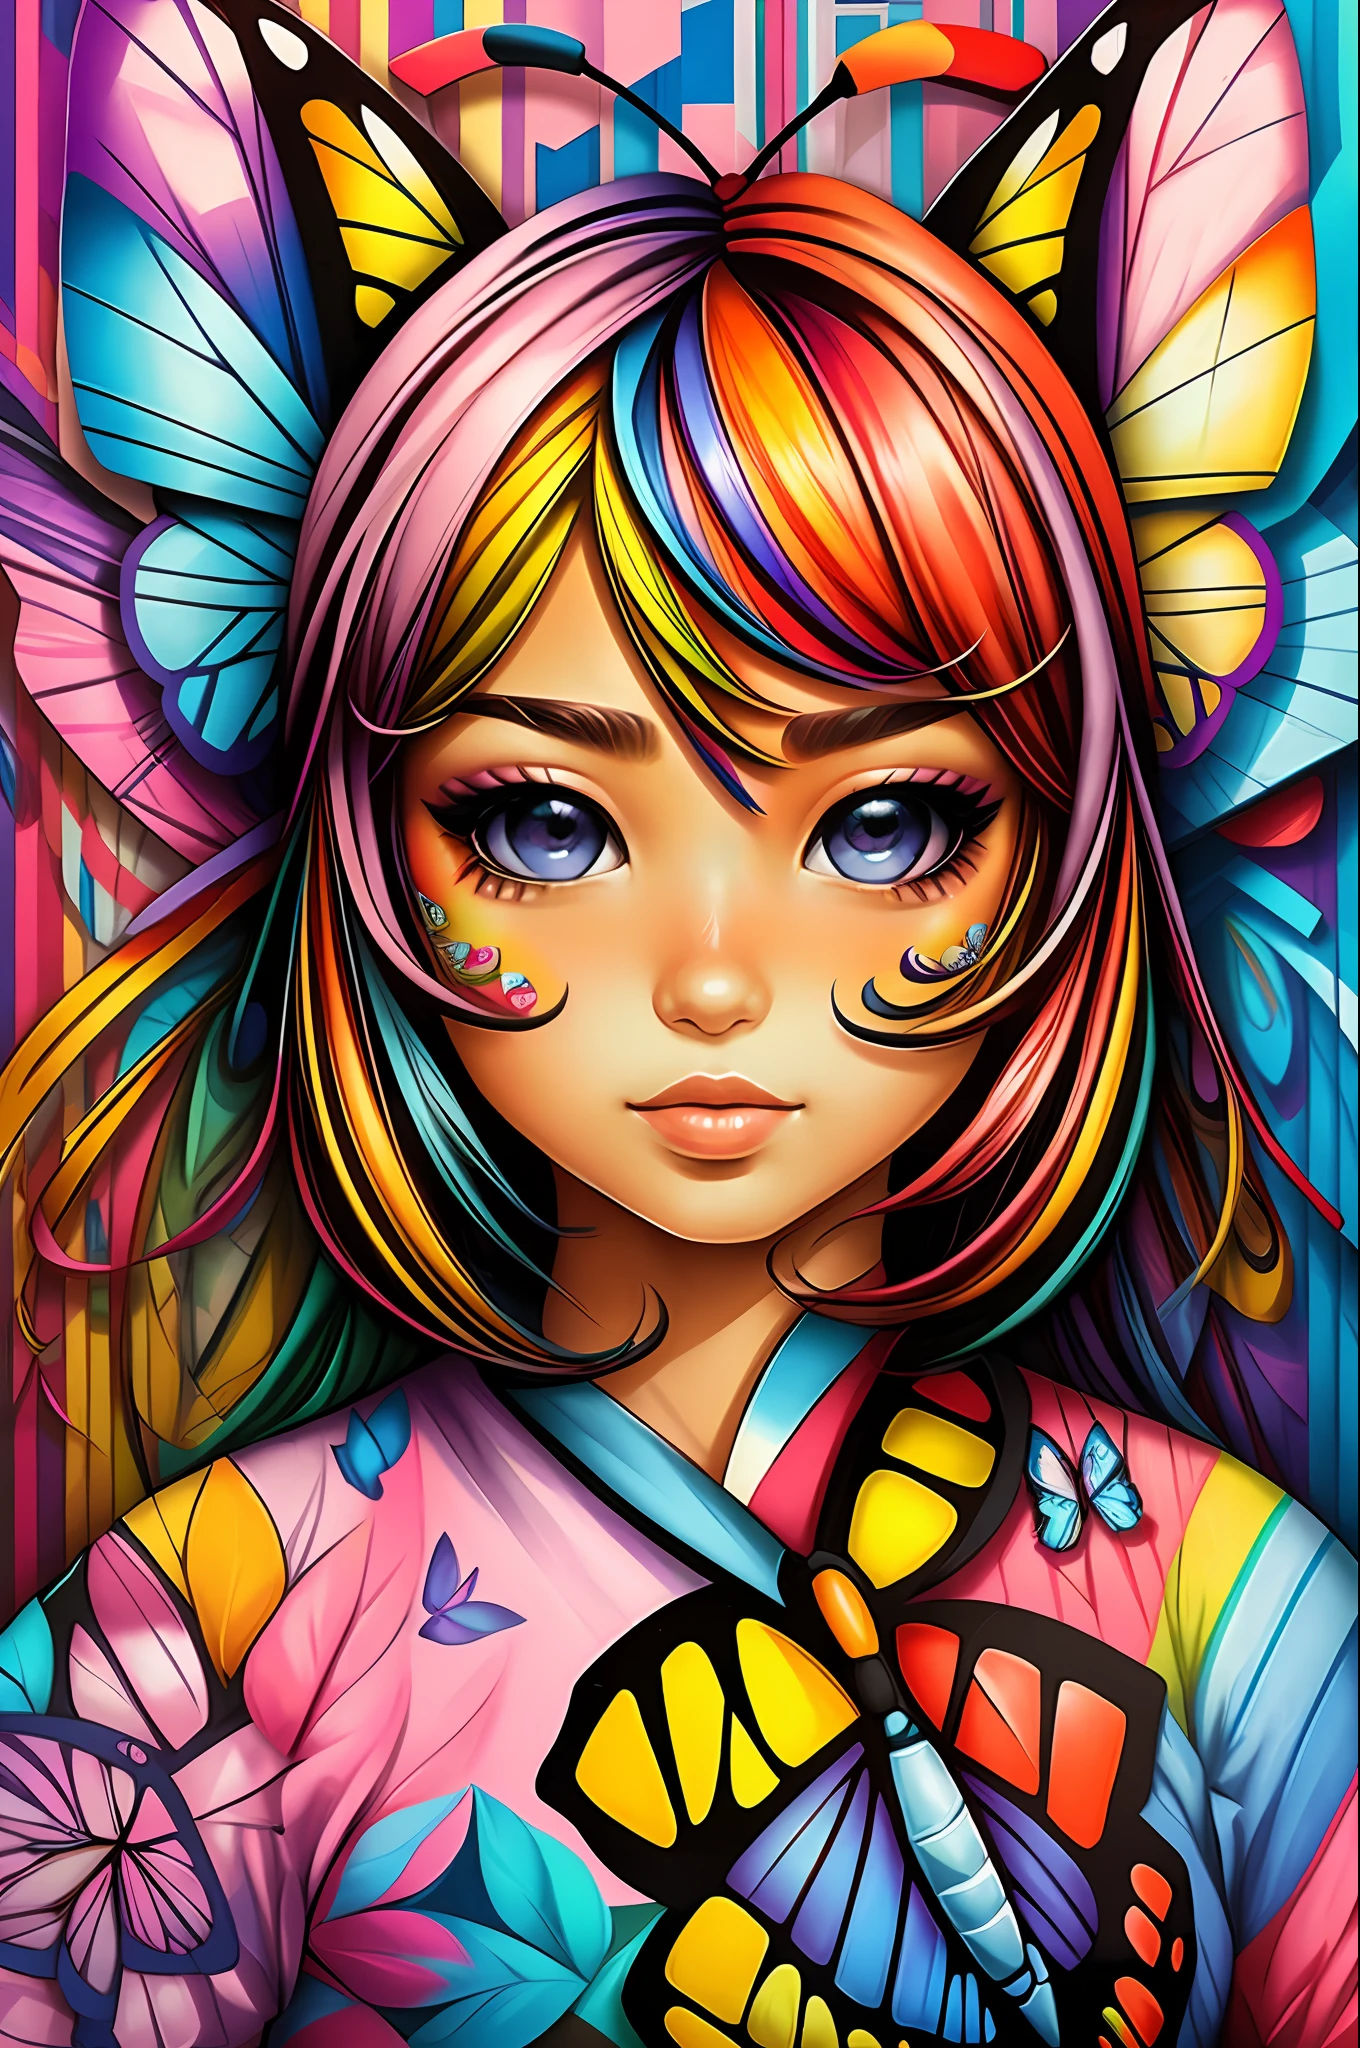 (Butterfly), Eduardo Kobra padding ,wall PORTRAIT geometric multidimensional, art, chibi,
yang08k, beautiful, colorful,
masterpieces, top quality, best quality, official art, beautiful and aesthetic,